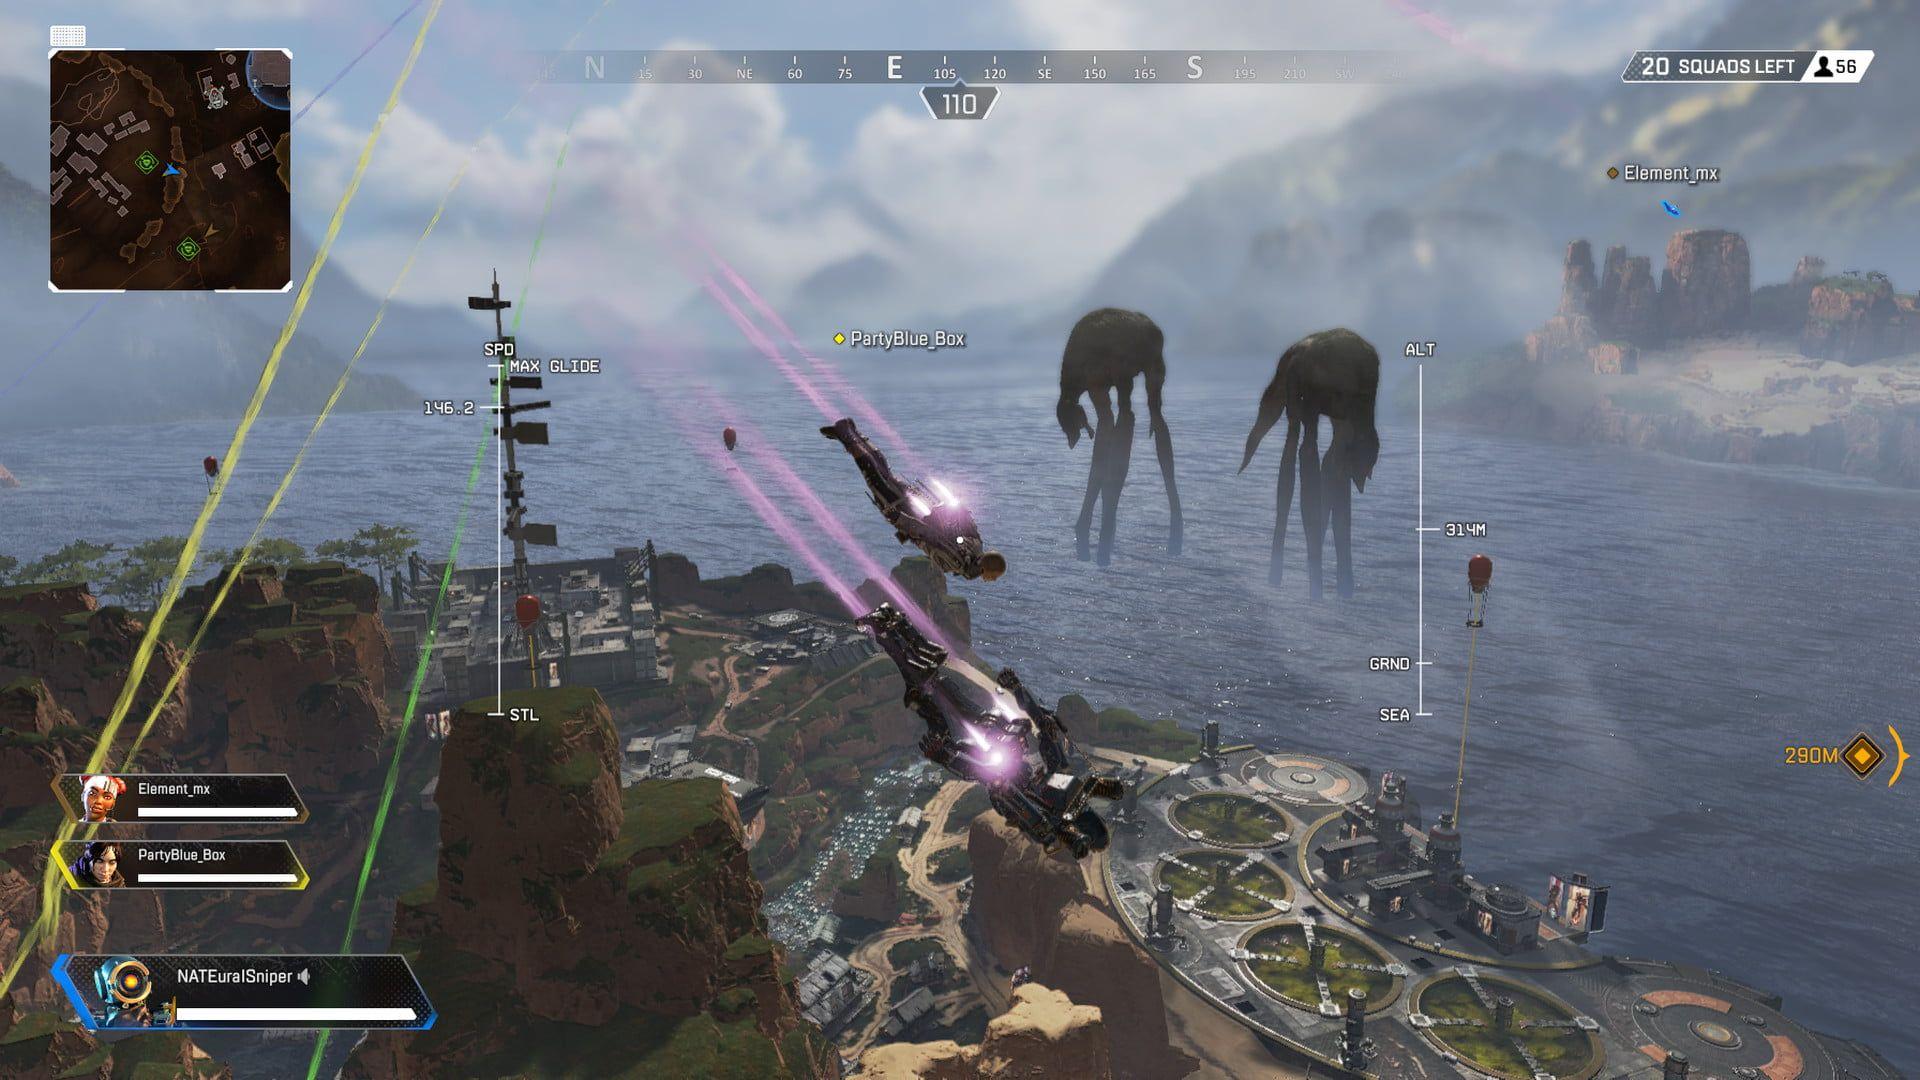 Apex Legends Proves the Battle Royale Fad is Just Getting Started